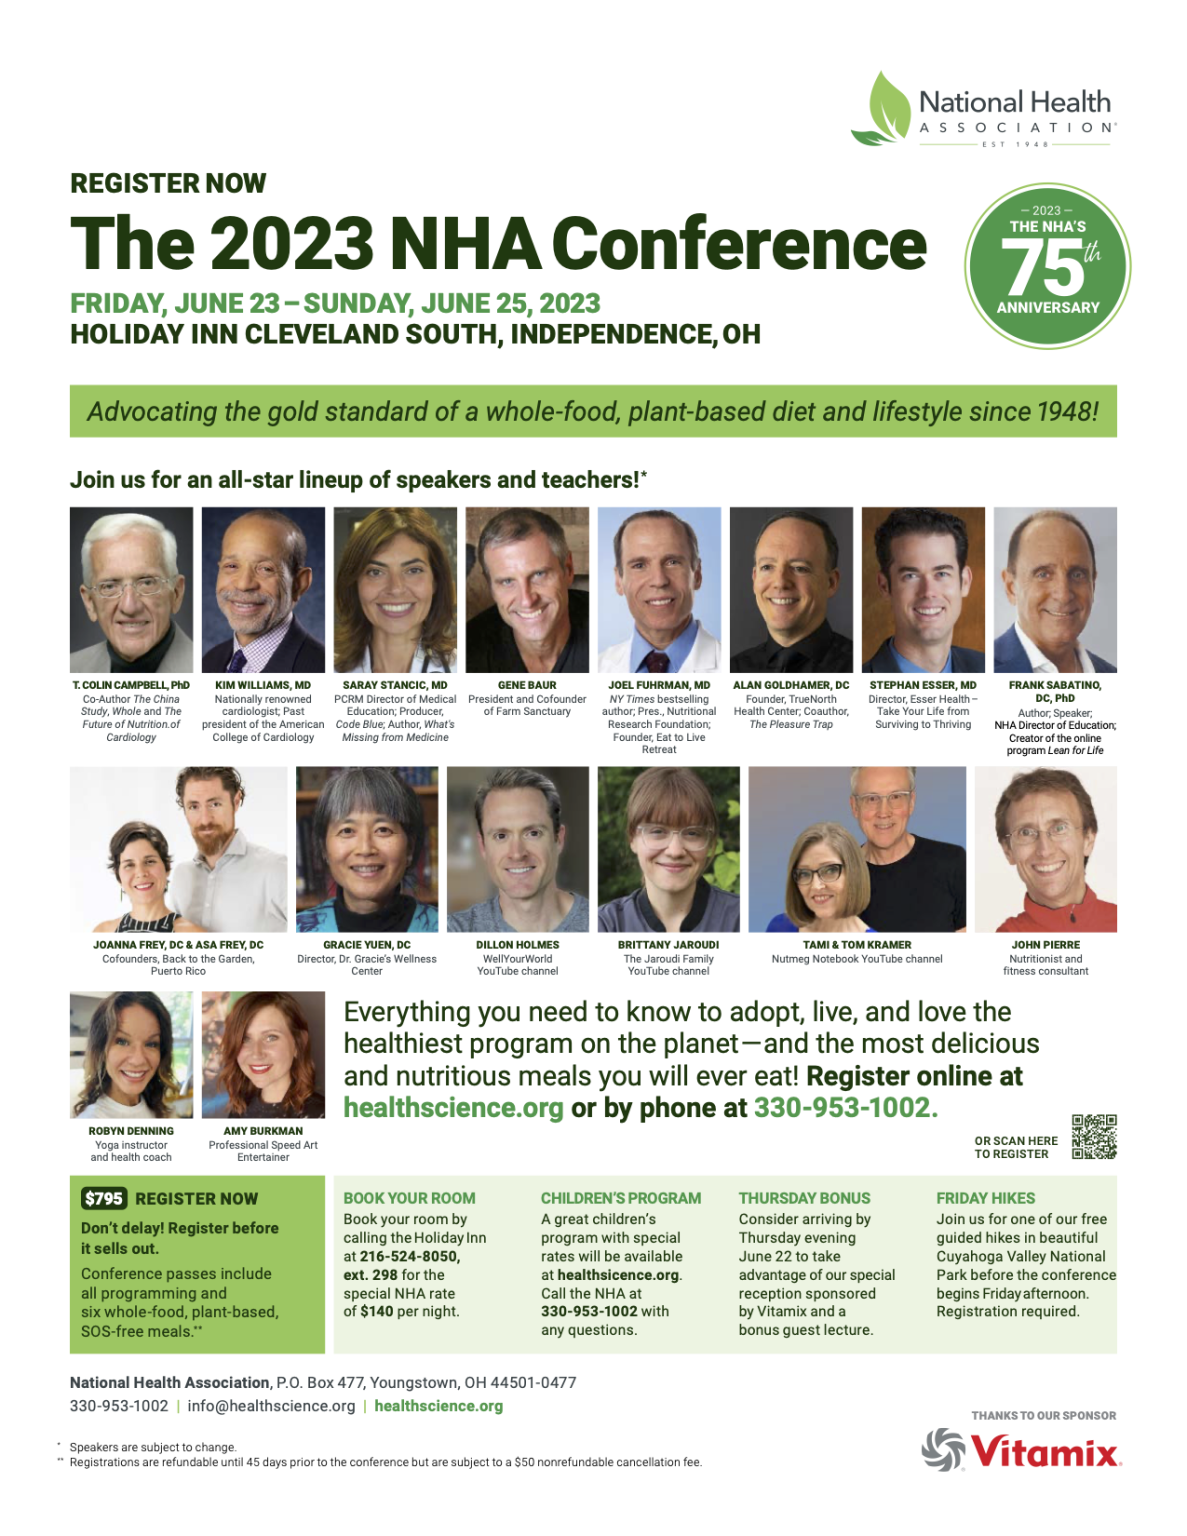 2023 NHA Conference National Health Association